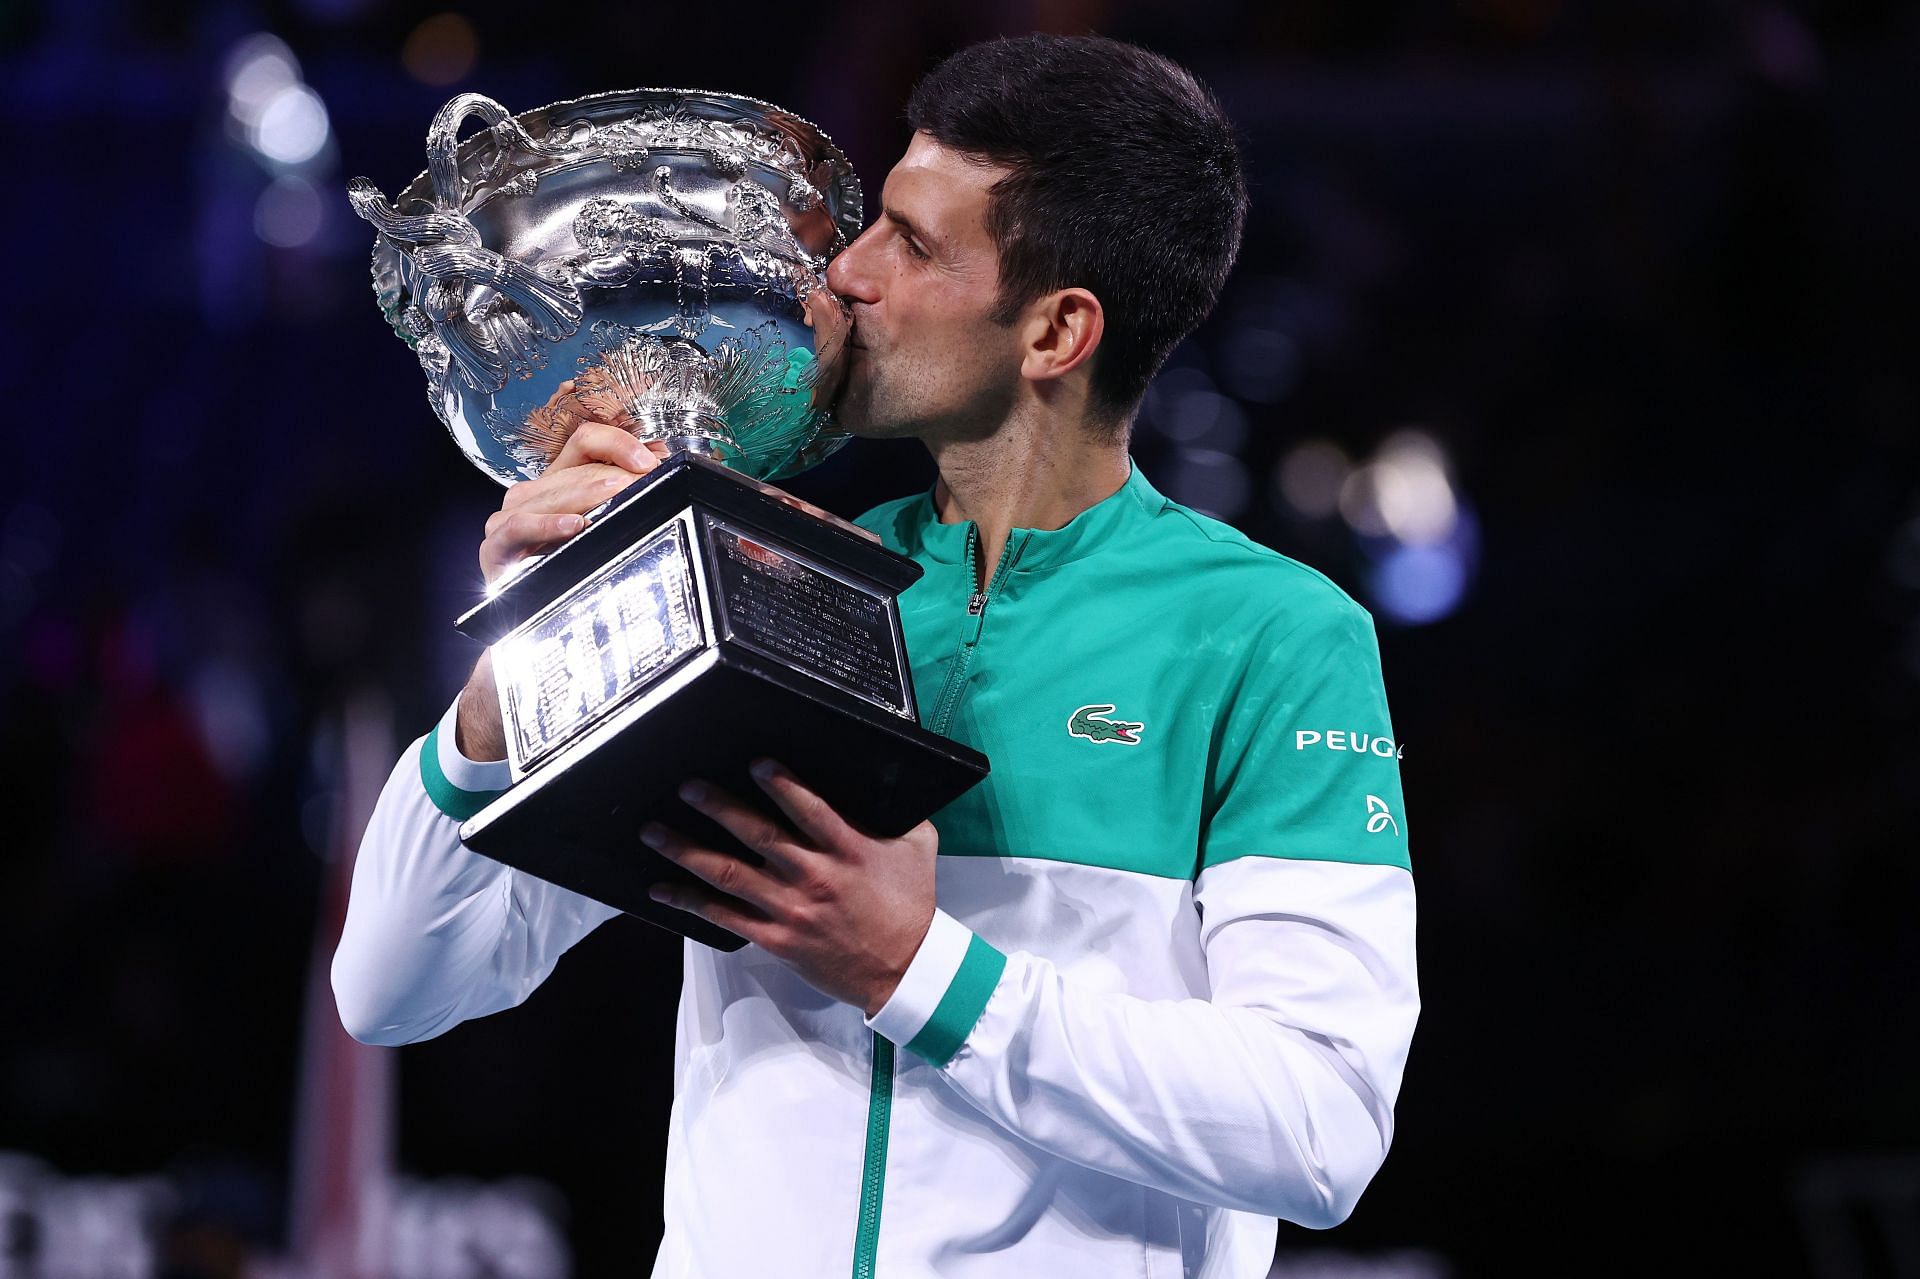 Djokovic is yet to confirm his participation in the Australian Open